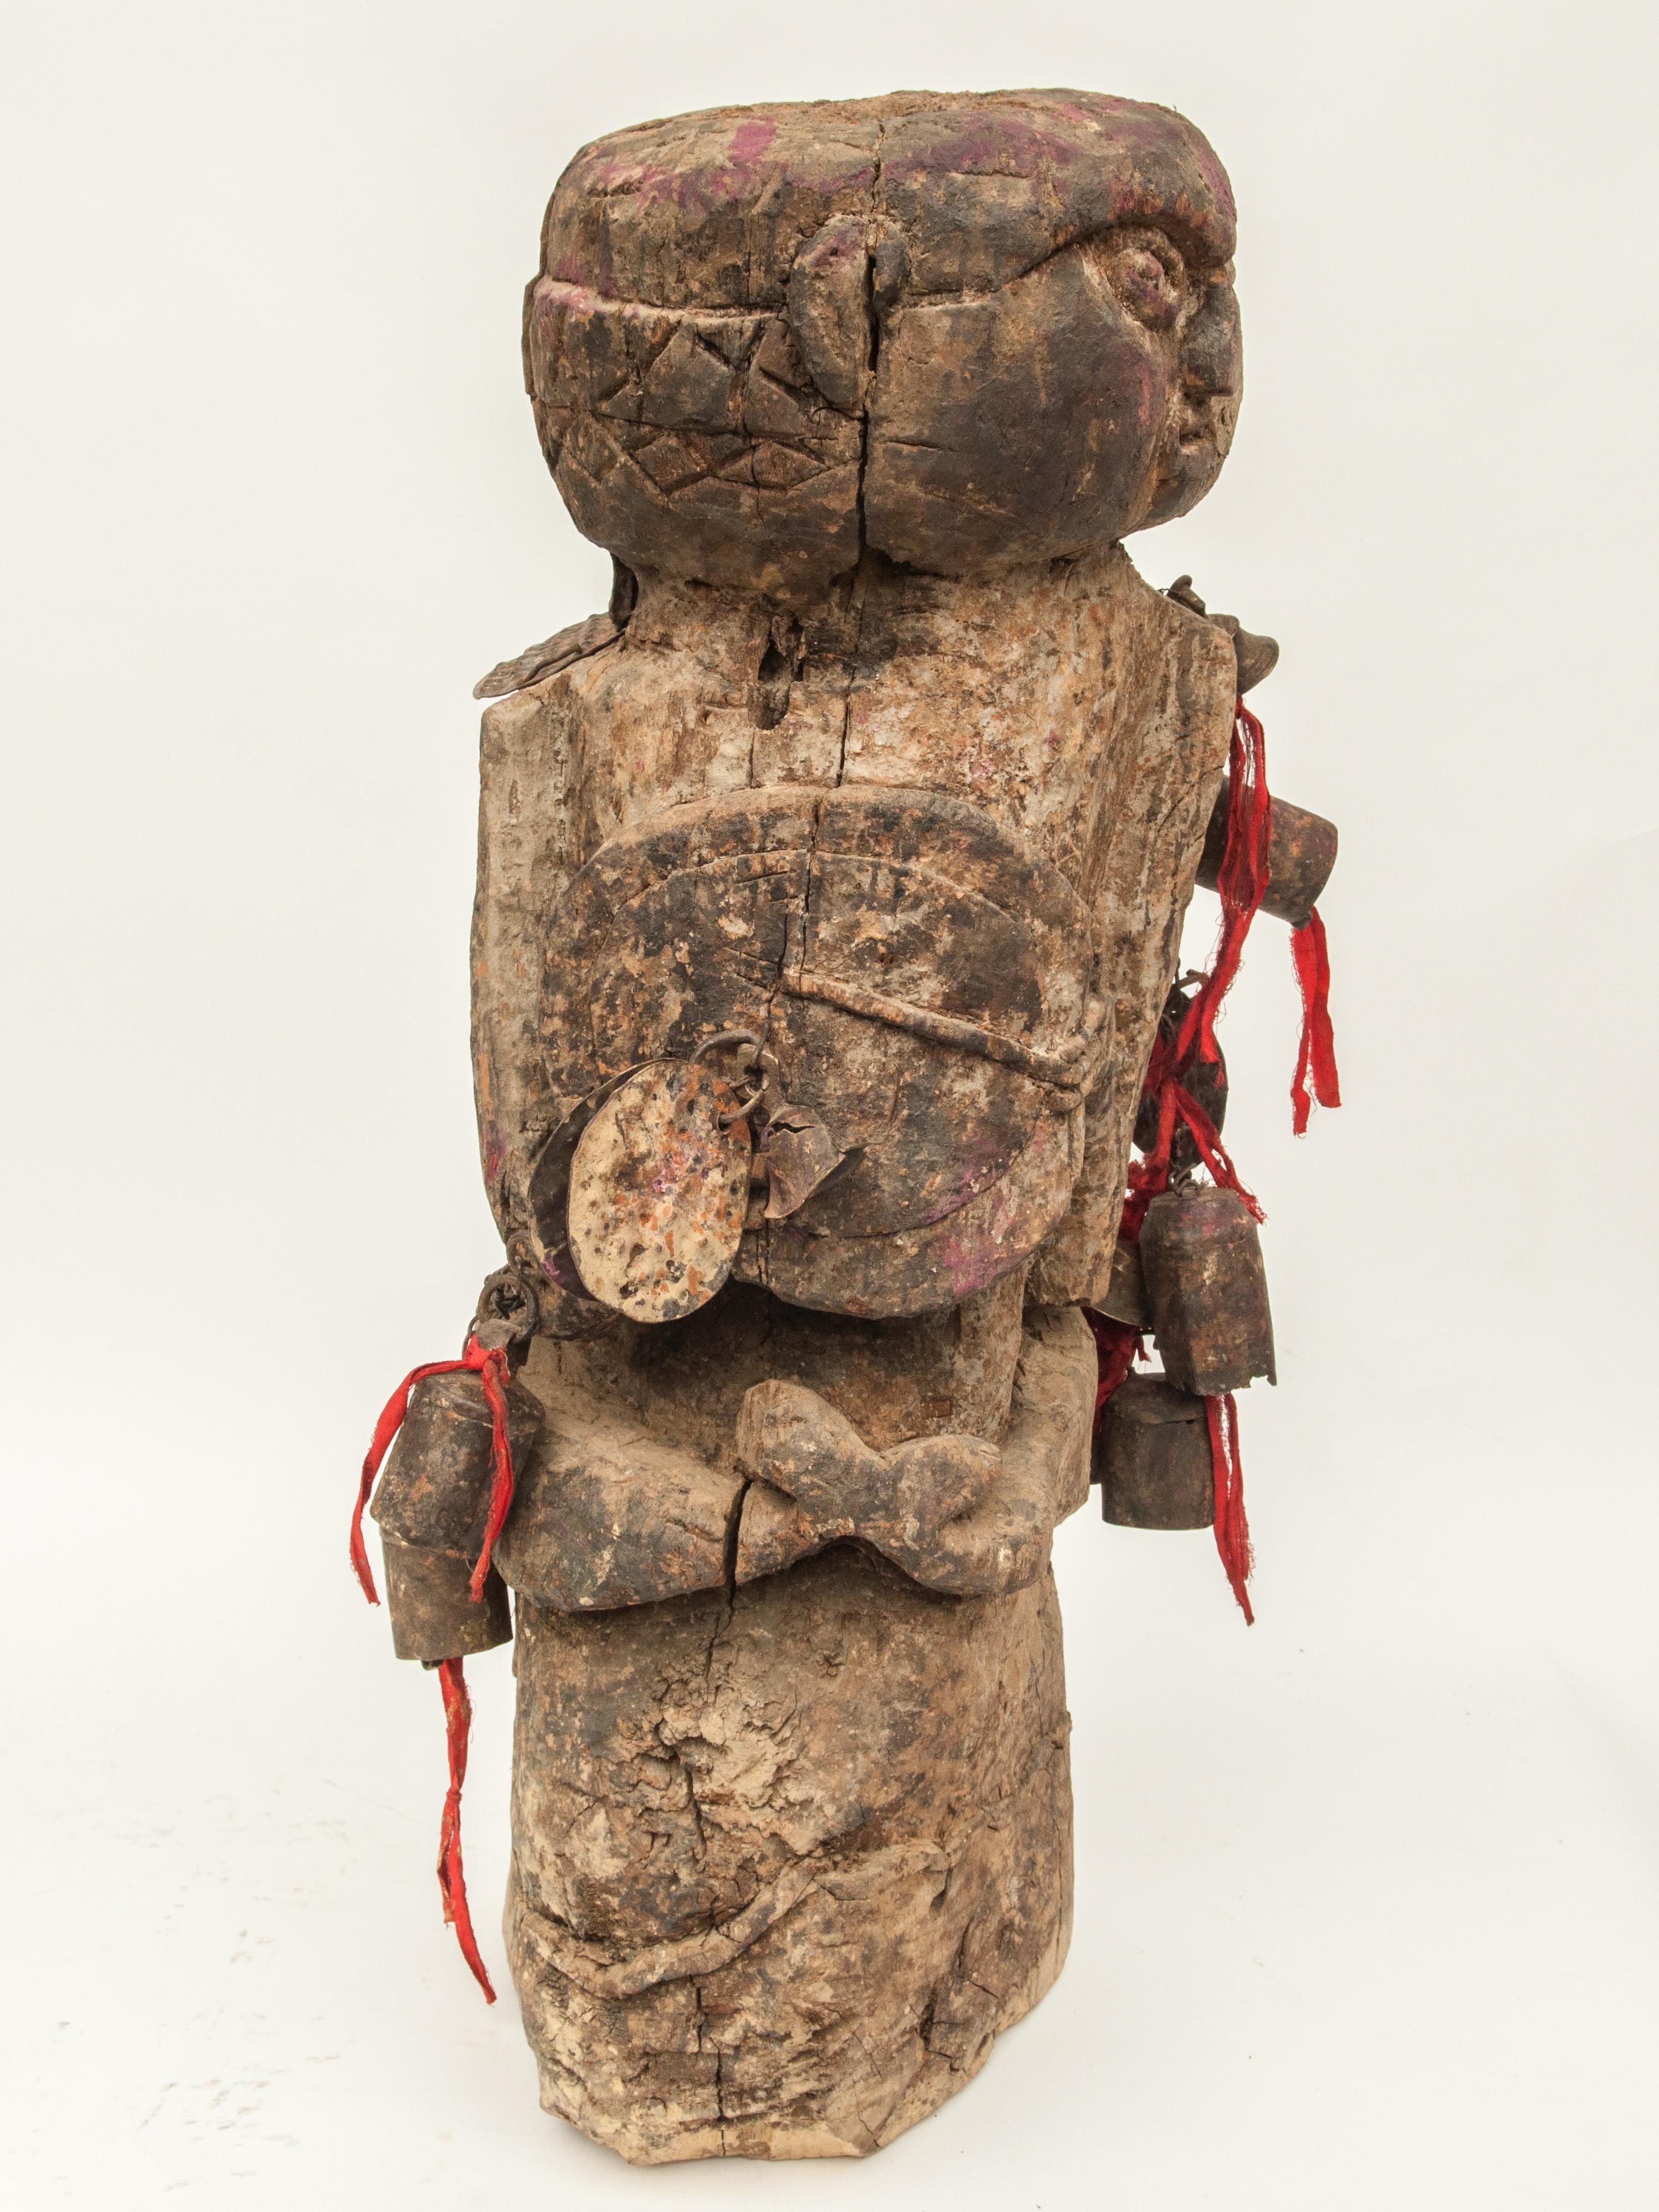 Hand-Carved Tribal Shaman Figure from West Central Nepal, Early to Mid-20th Century